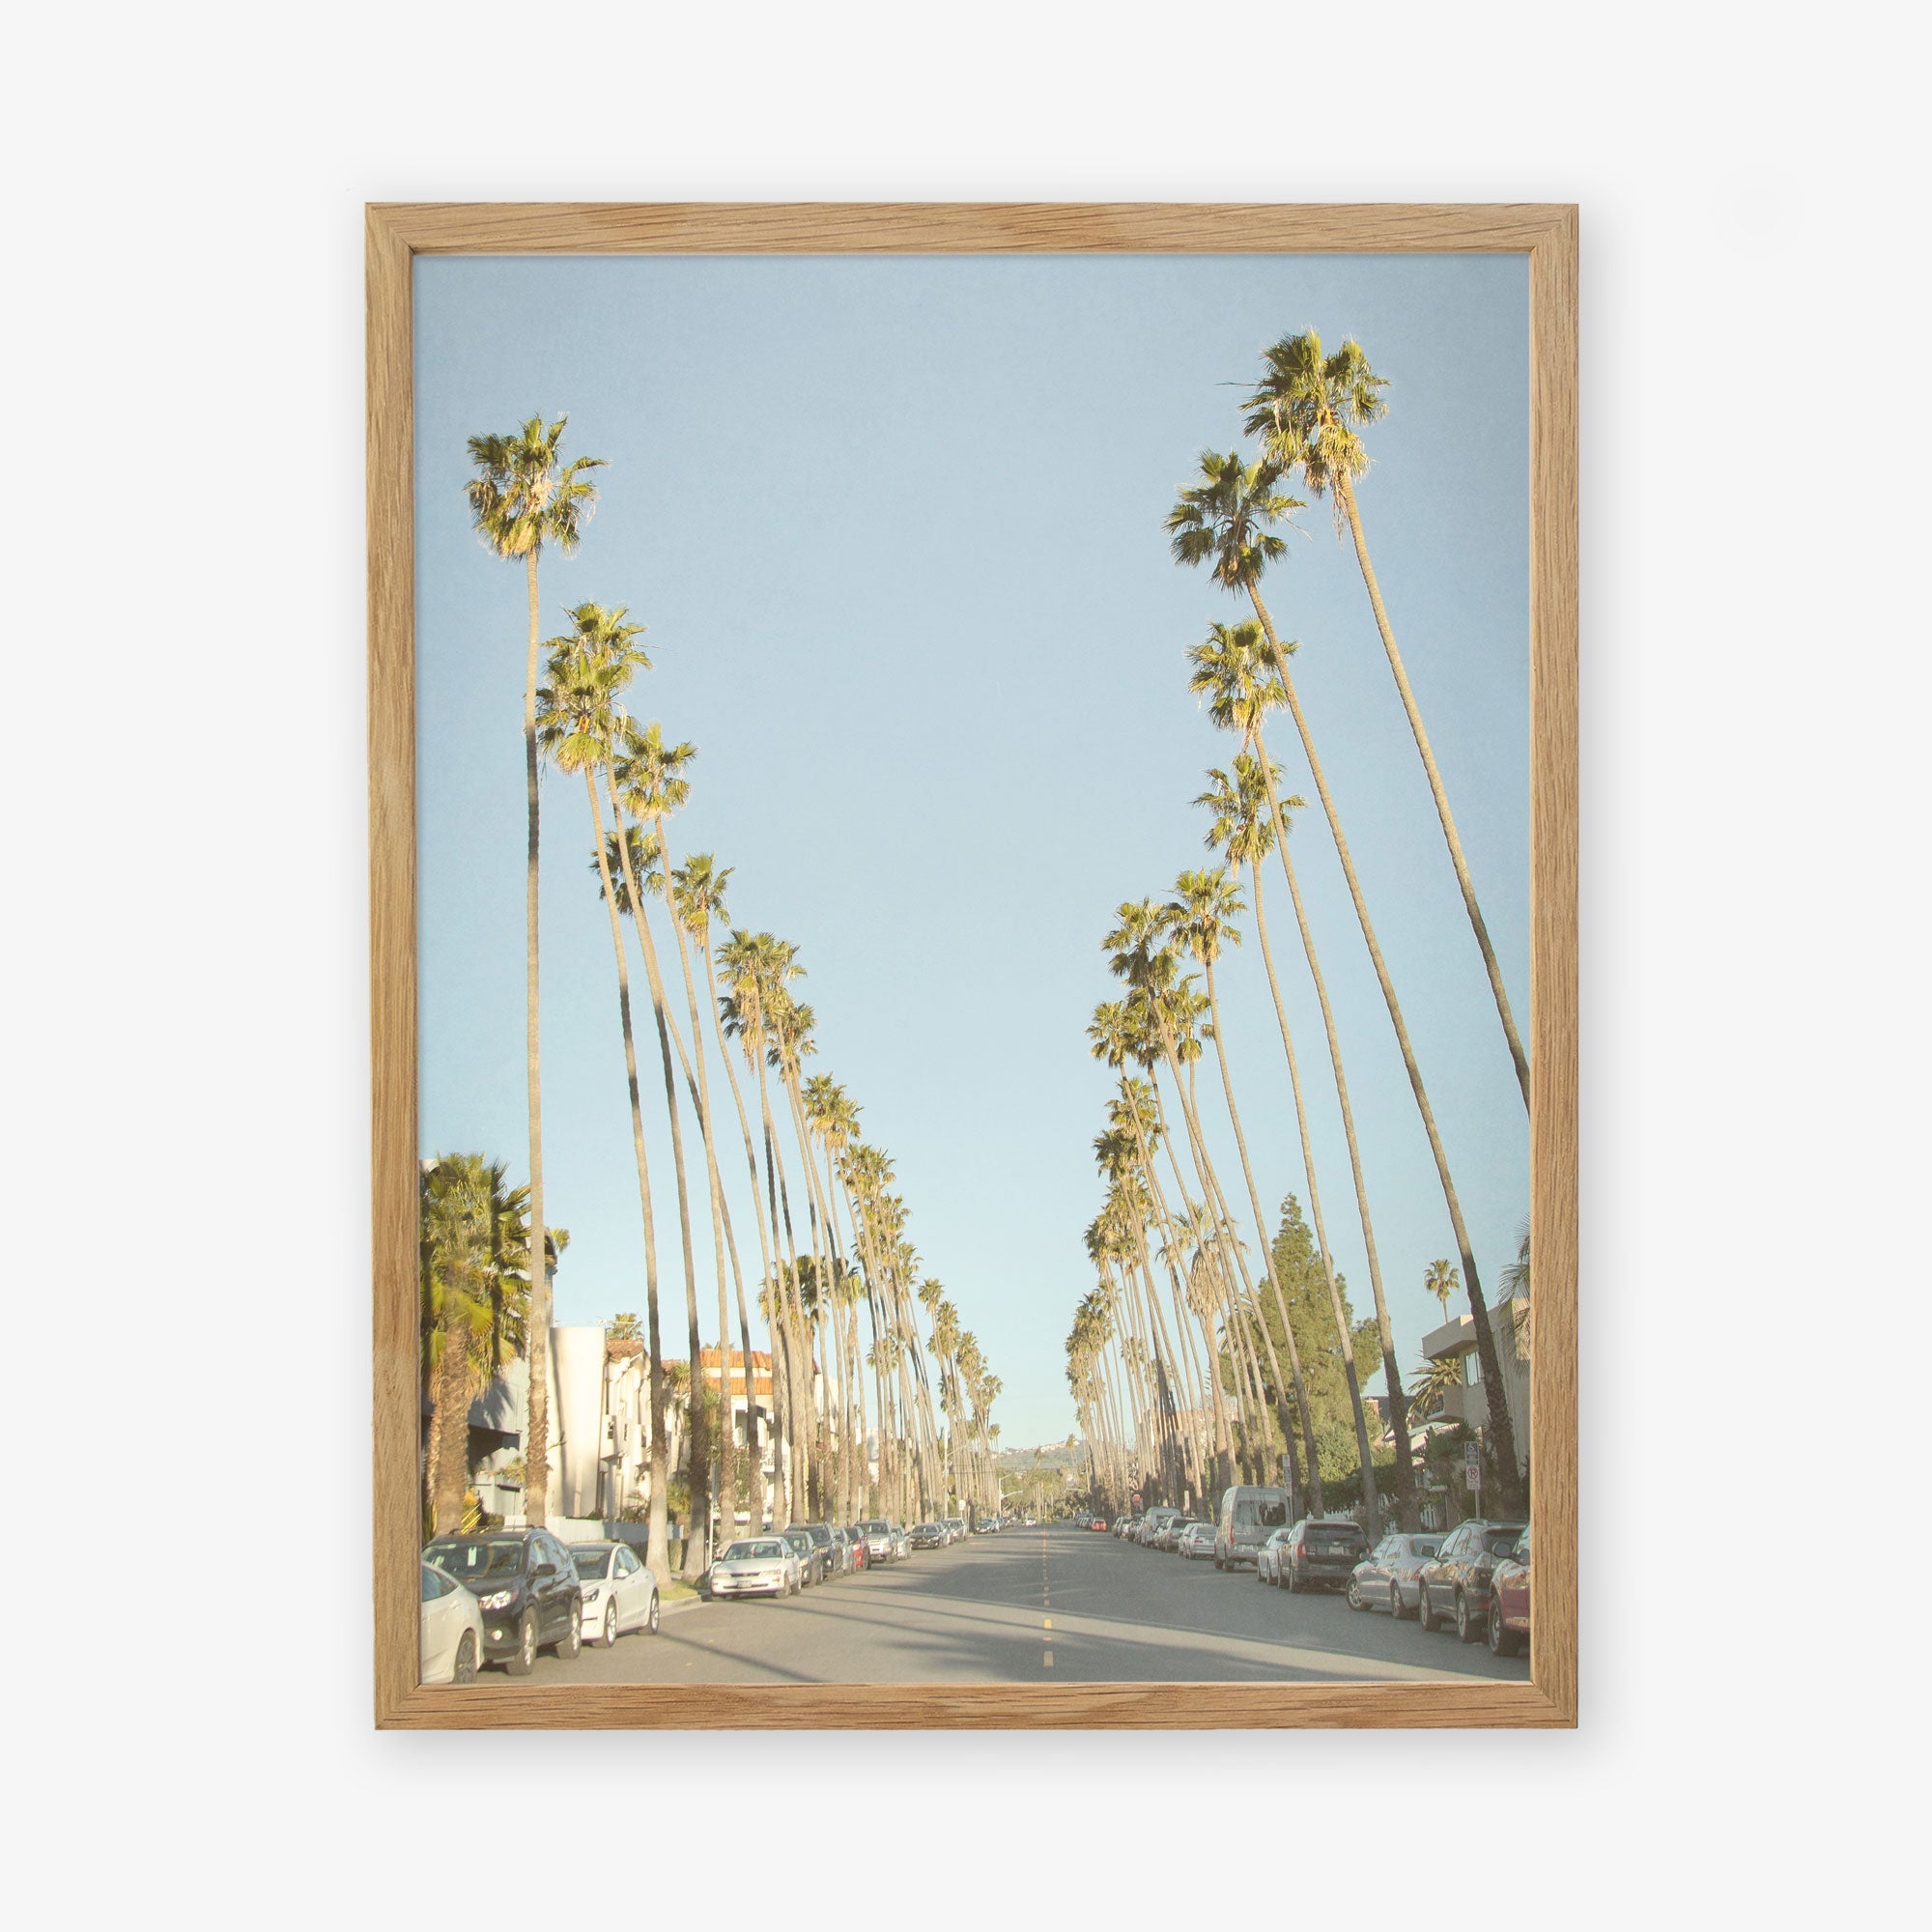 A framed picture of Los Angeles Palm Tree Lined Street 'Sunset Boulevard Dreams', lined with tall palm trees and parked cars, evoking a calm, suburban atmosphere by Offley Green.